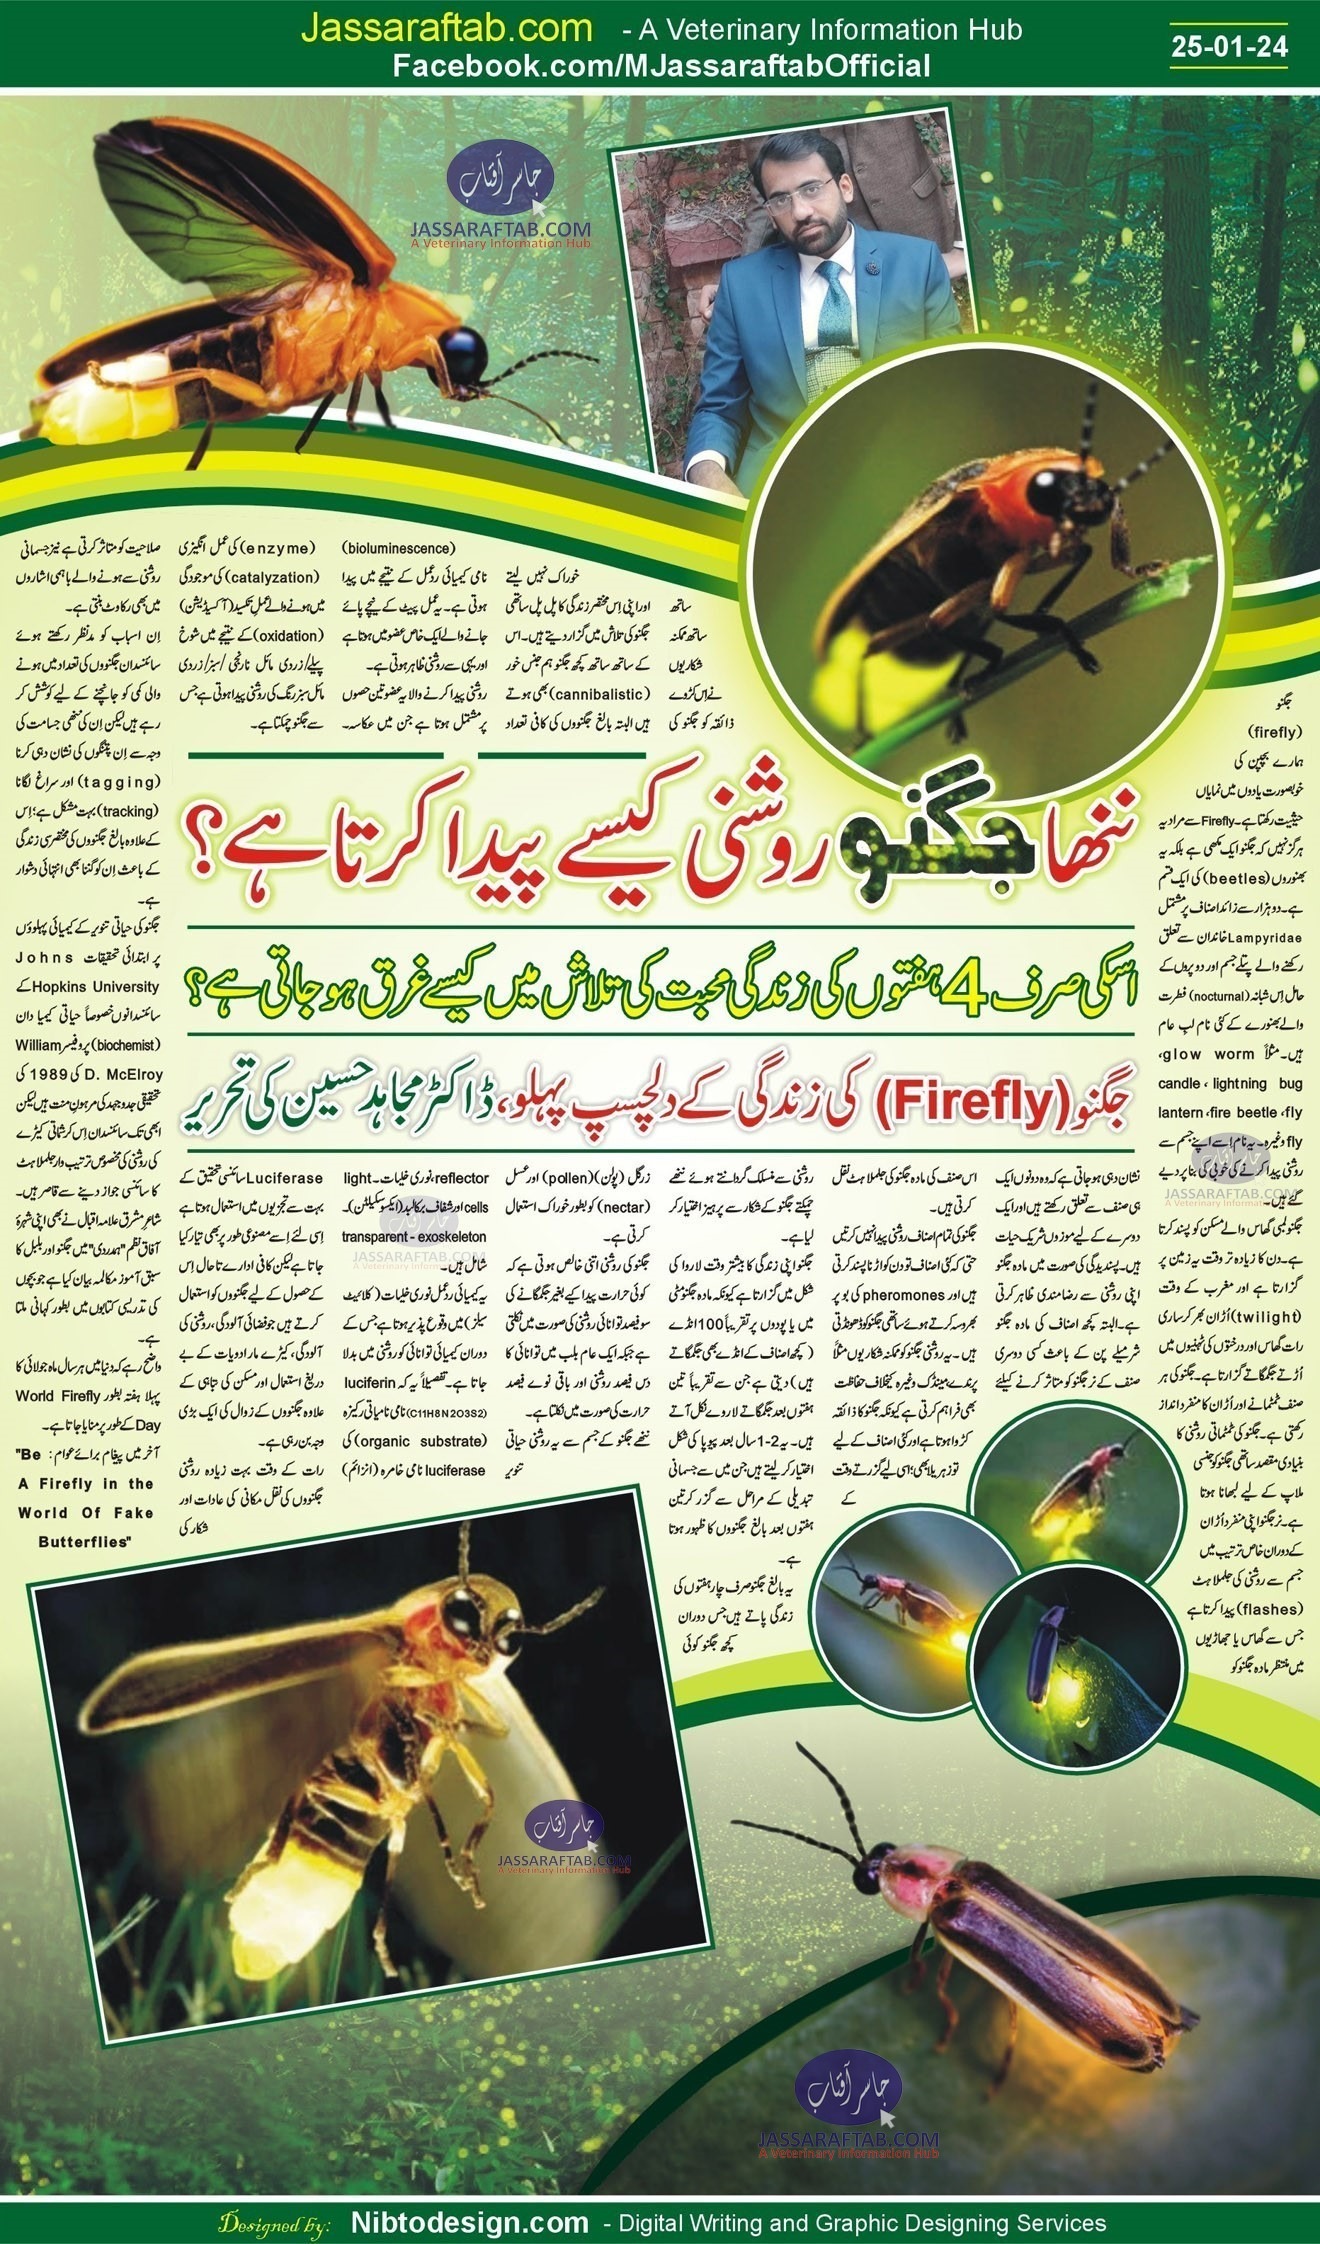 Facts about Fire Fly Bug or Glow Worm or Fireflies Lightning Bugs or fireflies beetles or firefly